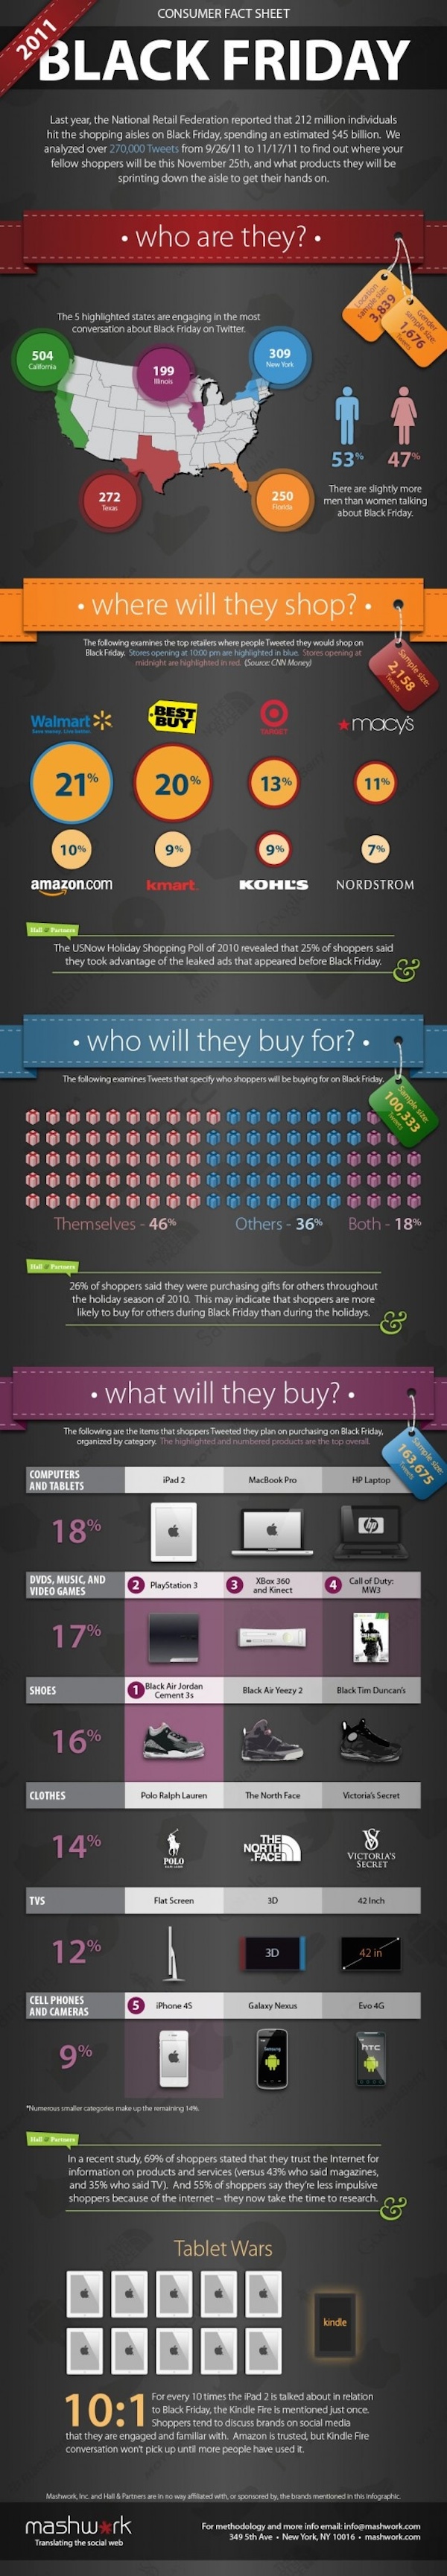 20 Black Friday And Cyber Monday Infographics image 81.jpg1